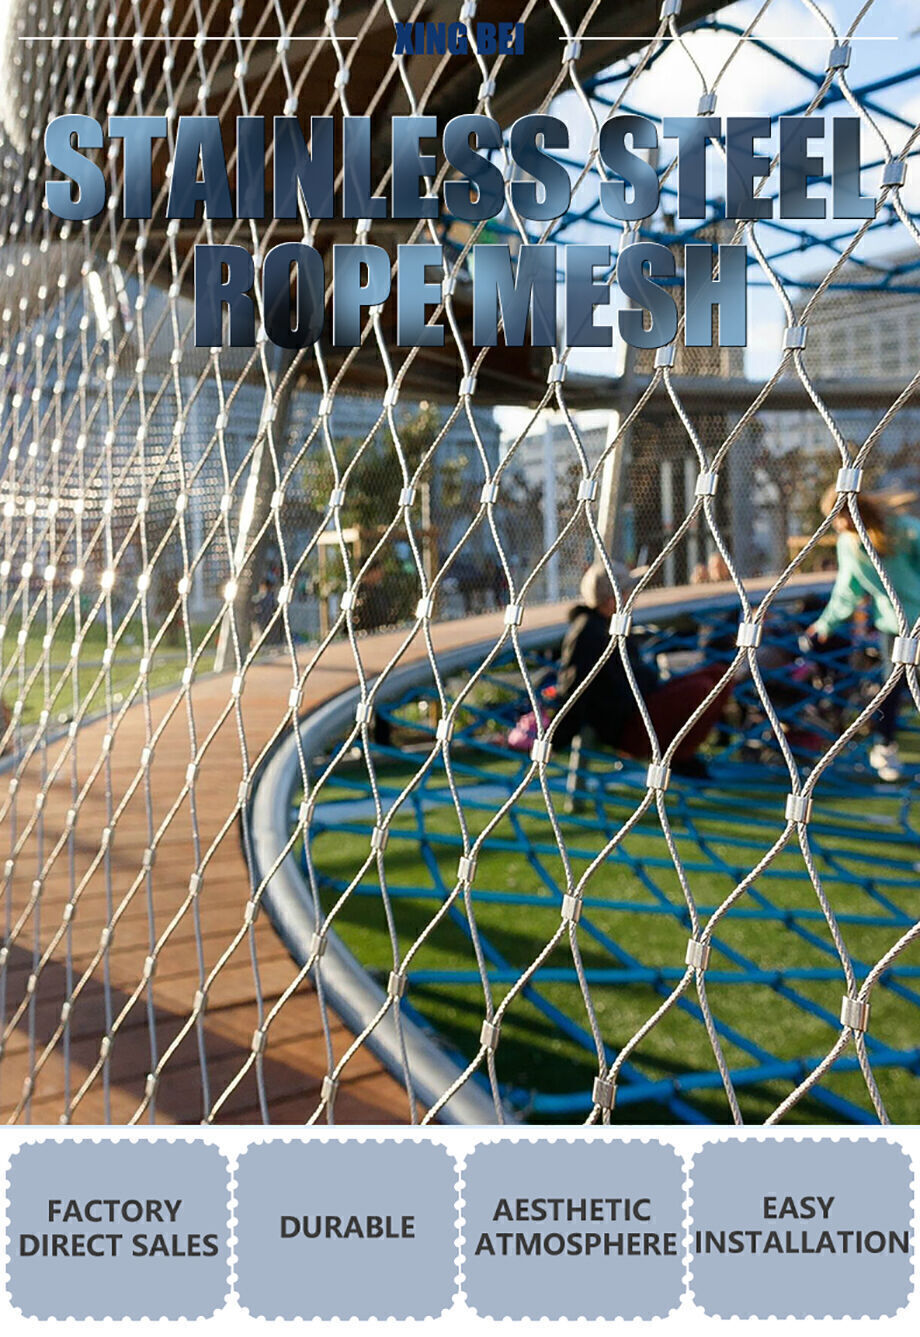 Get A Wholesale bridge nets For Property Protection 